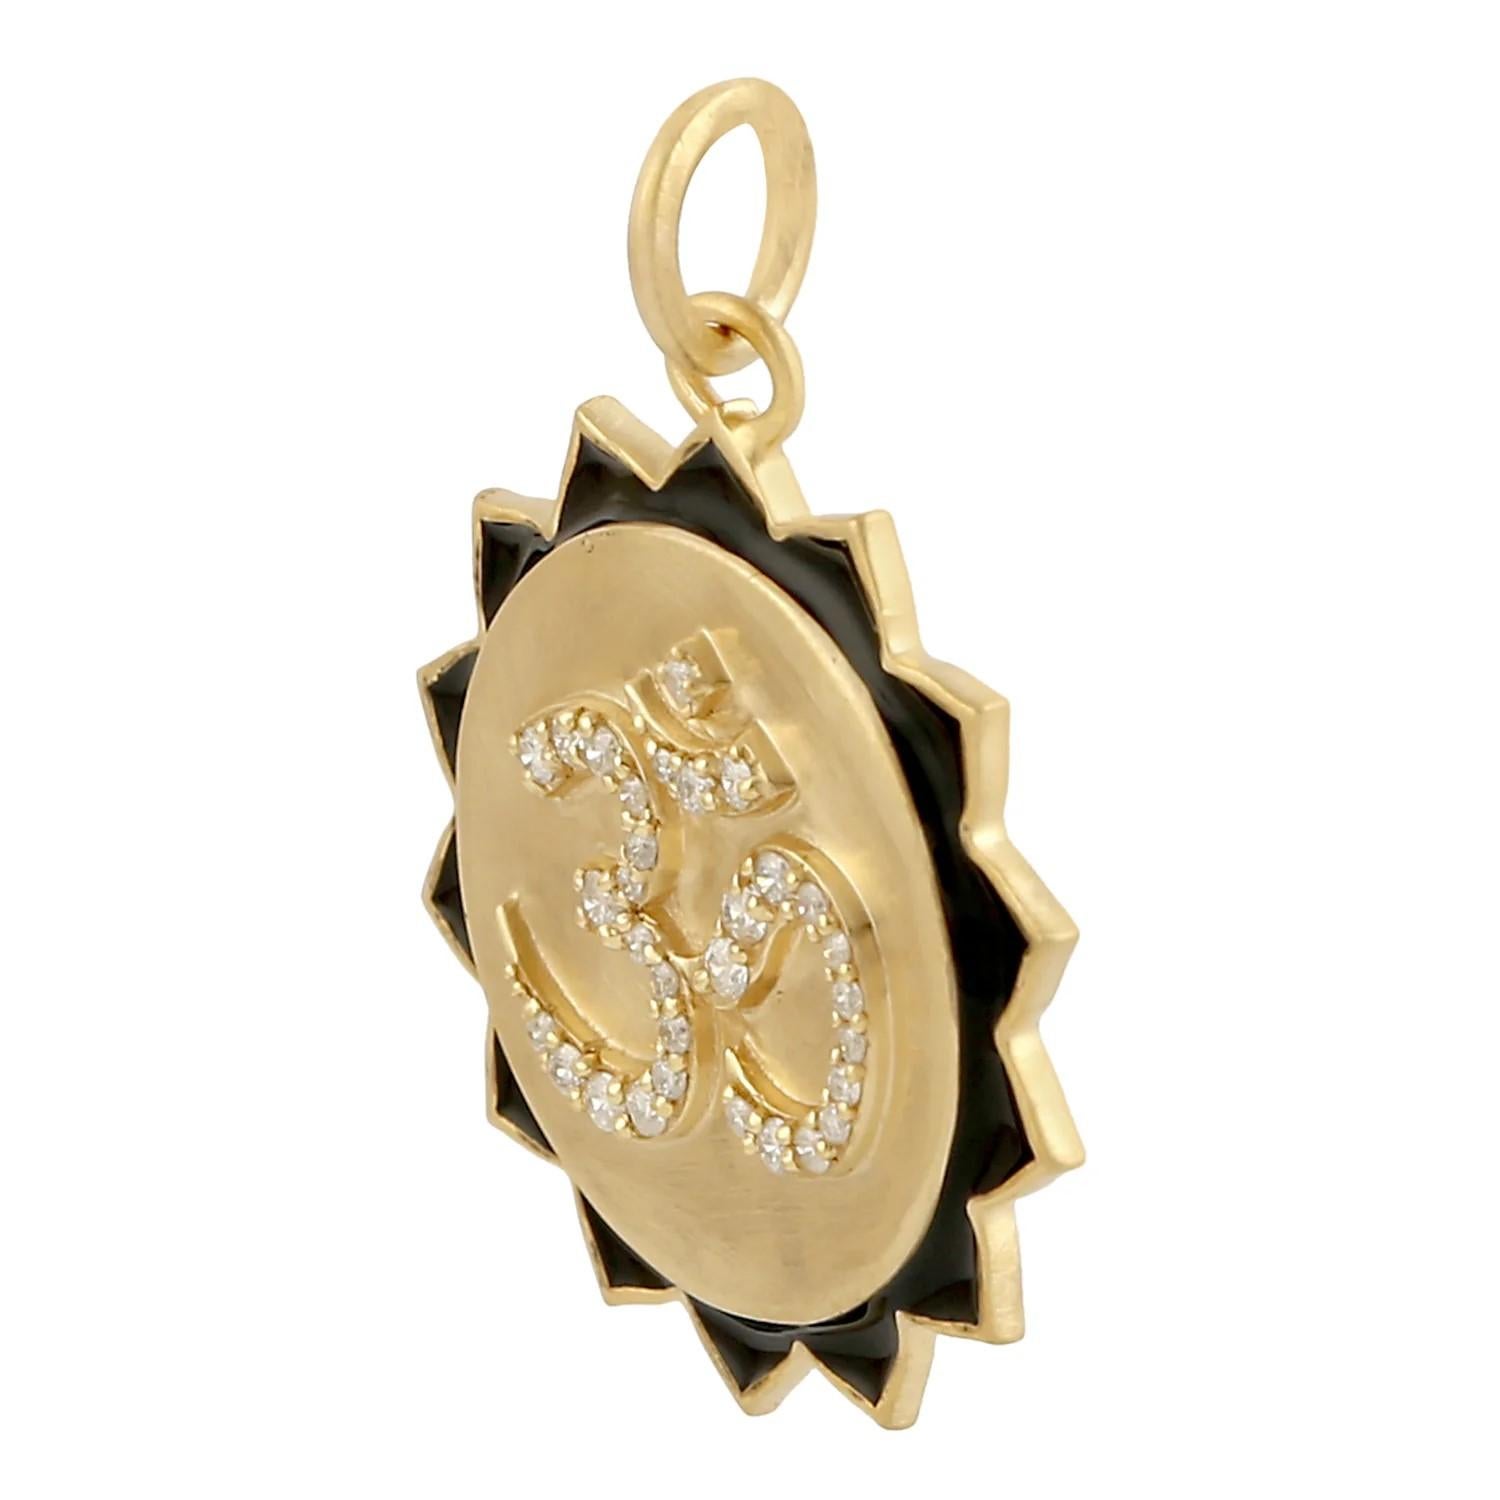 This medallion charm has been meticulously crafted from 14-karat gold and set in .23 carats of sparkling diamonds. 

FOLLOW  MEGHNA JEWELS storefront to view the latest collection & exclusive pieces.  Meghna Jewels is proudly rated as a Top Seller